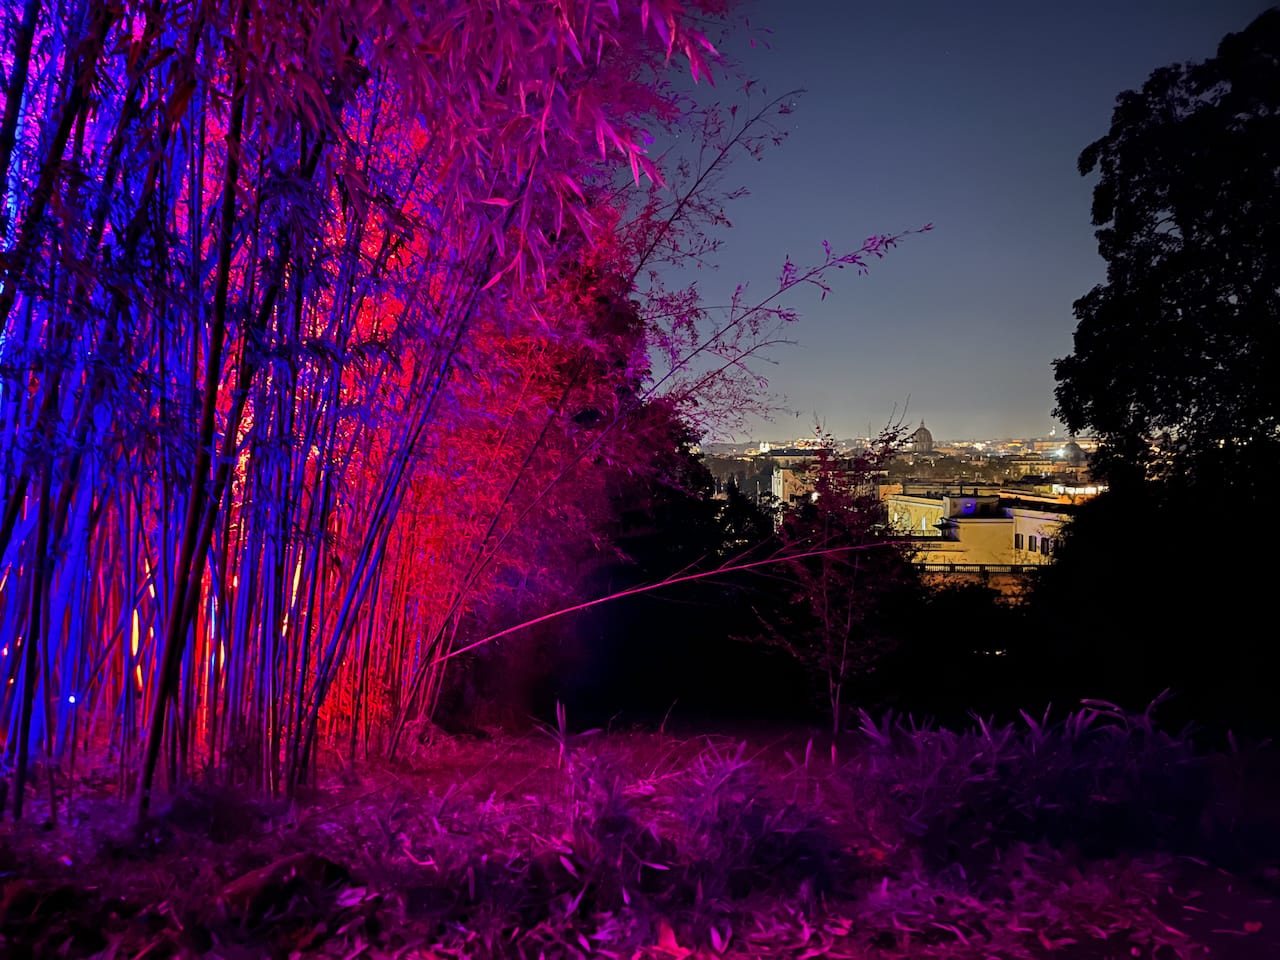 On the left, a bamboo forest is lit in blue and red lights. On the right, the dark outline of some trees frames the city skyline lit in contrasting soft yellow lights. In the middle, the Dome of St. Peter's raises above the horizon.